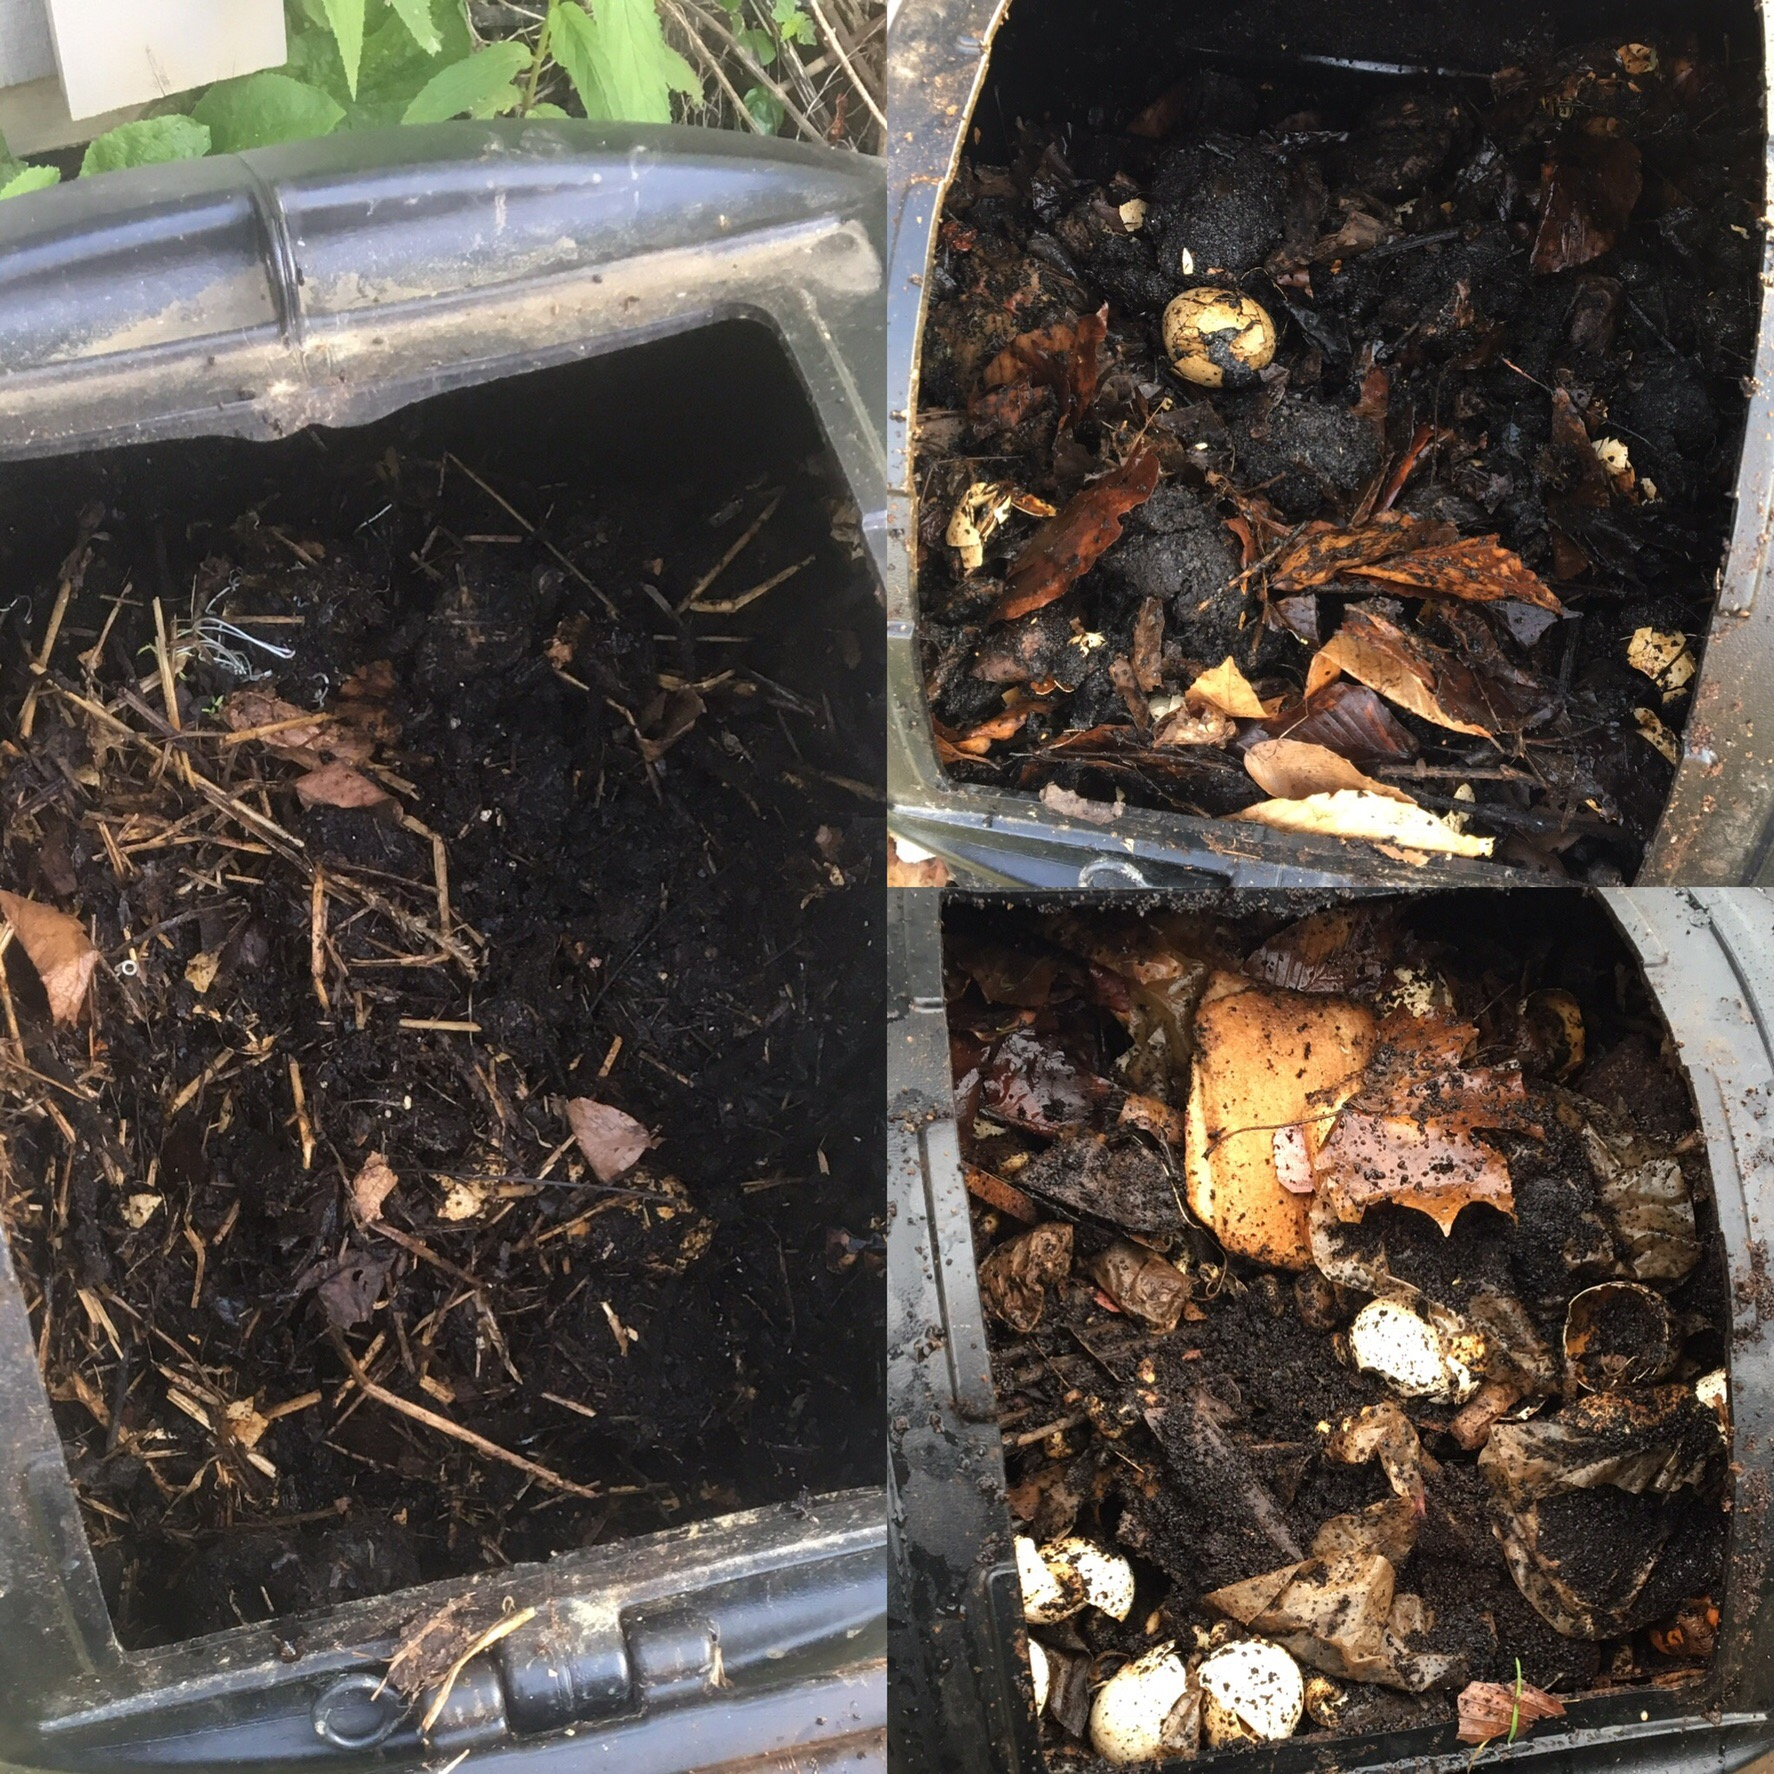  My compost July 21 (left), on April 15 (top) and December 26 (bottom).